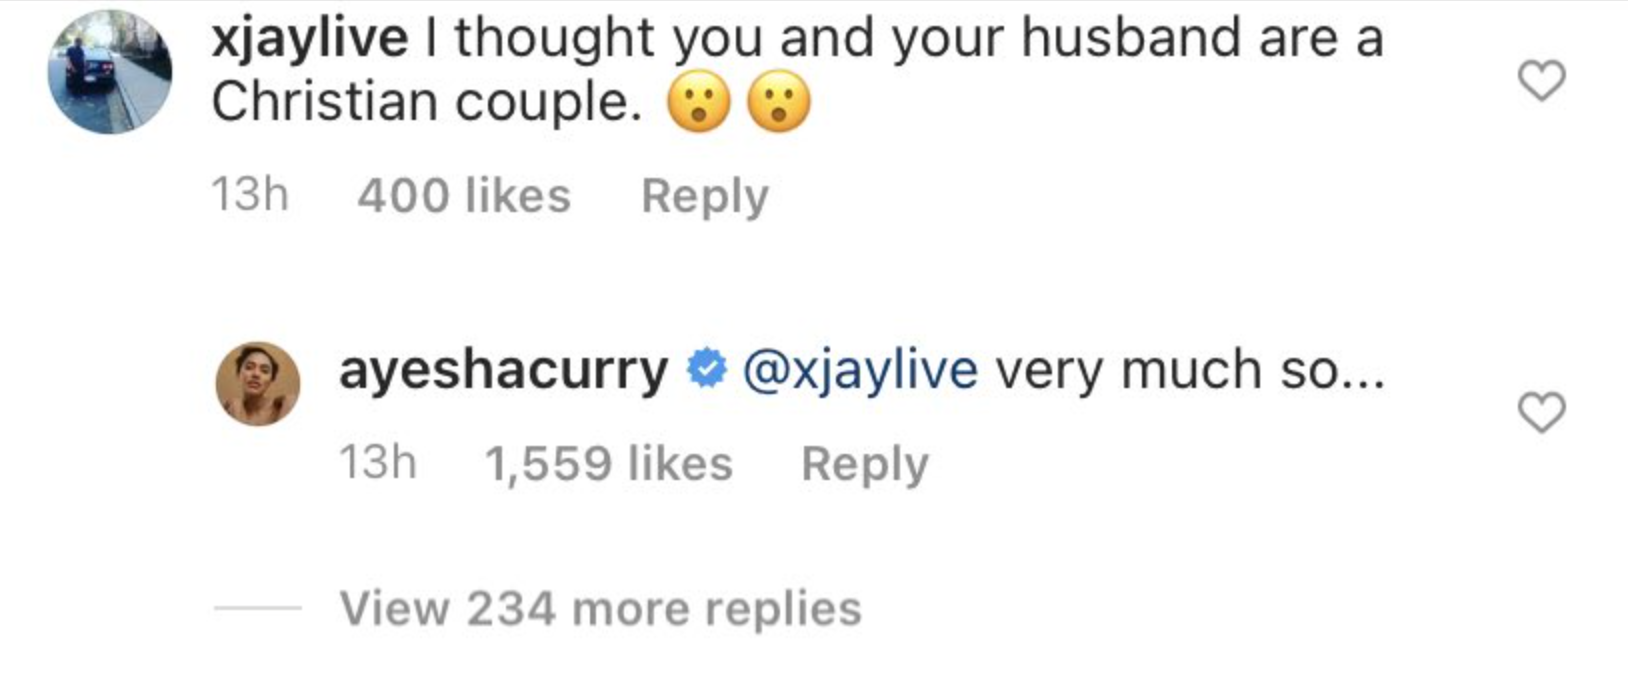 Stephen Curry Shares Sexy Snap with Wife Ayesha